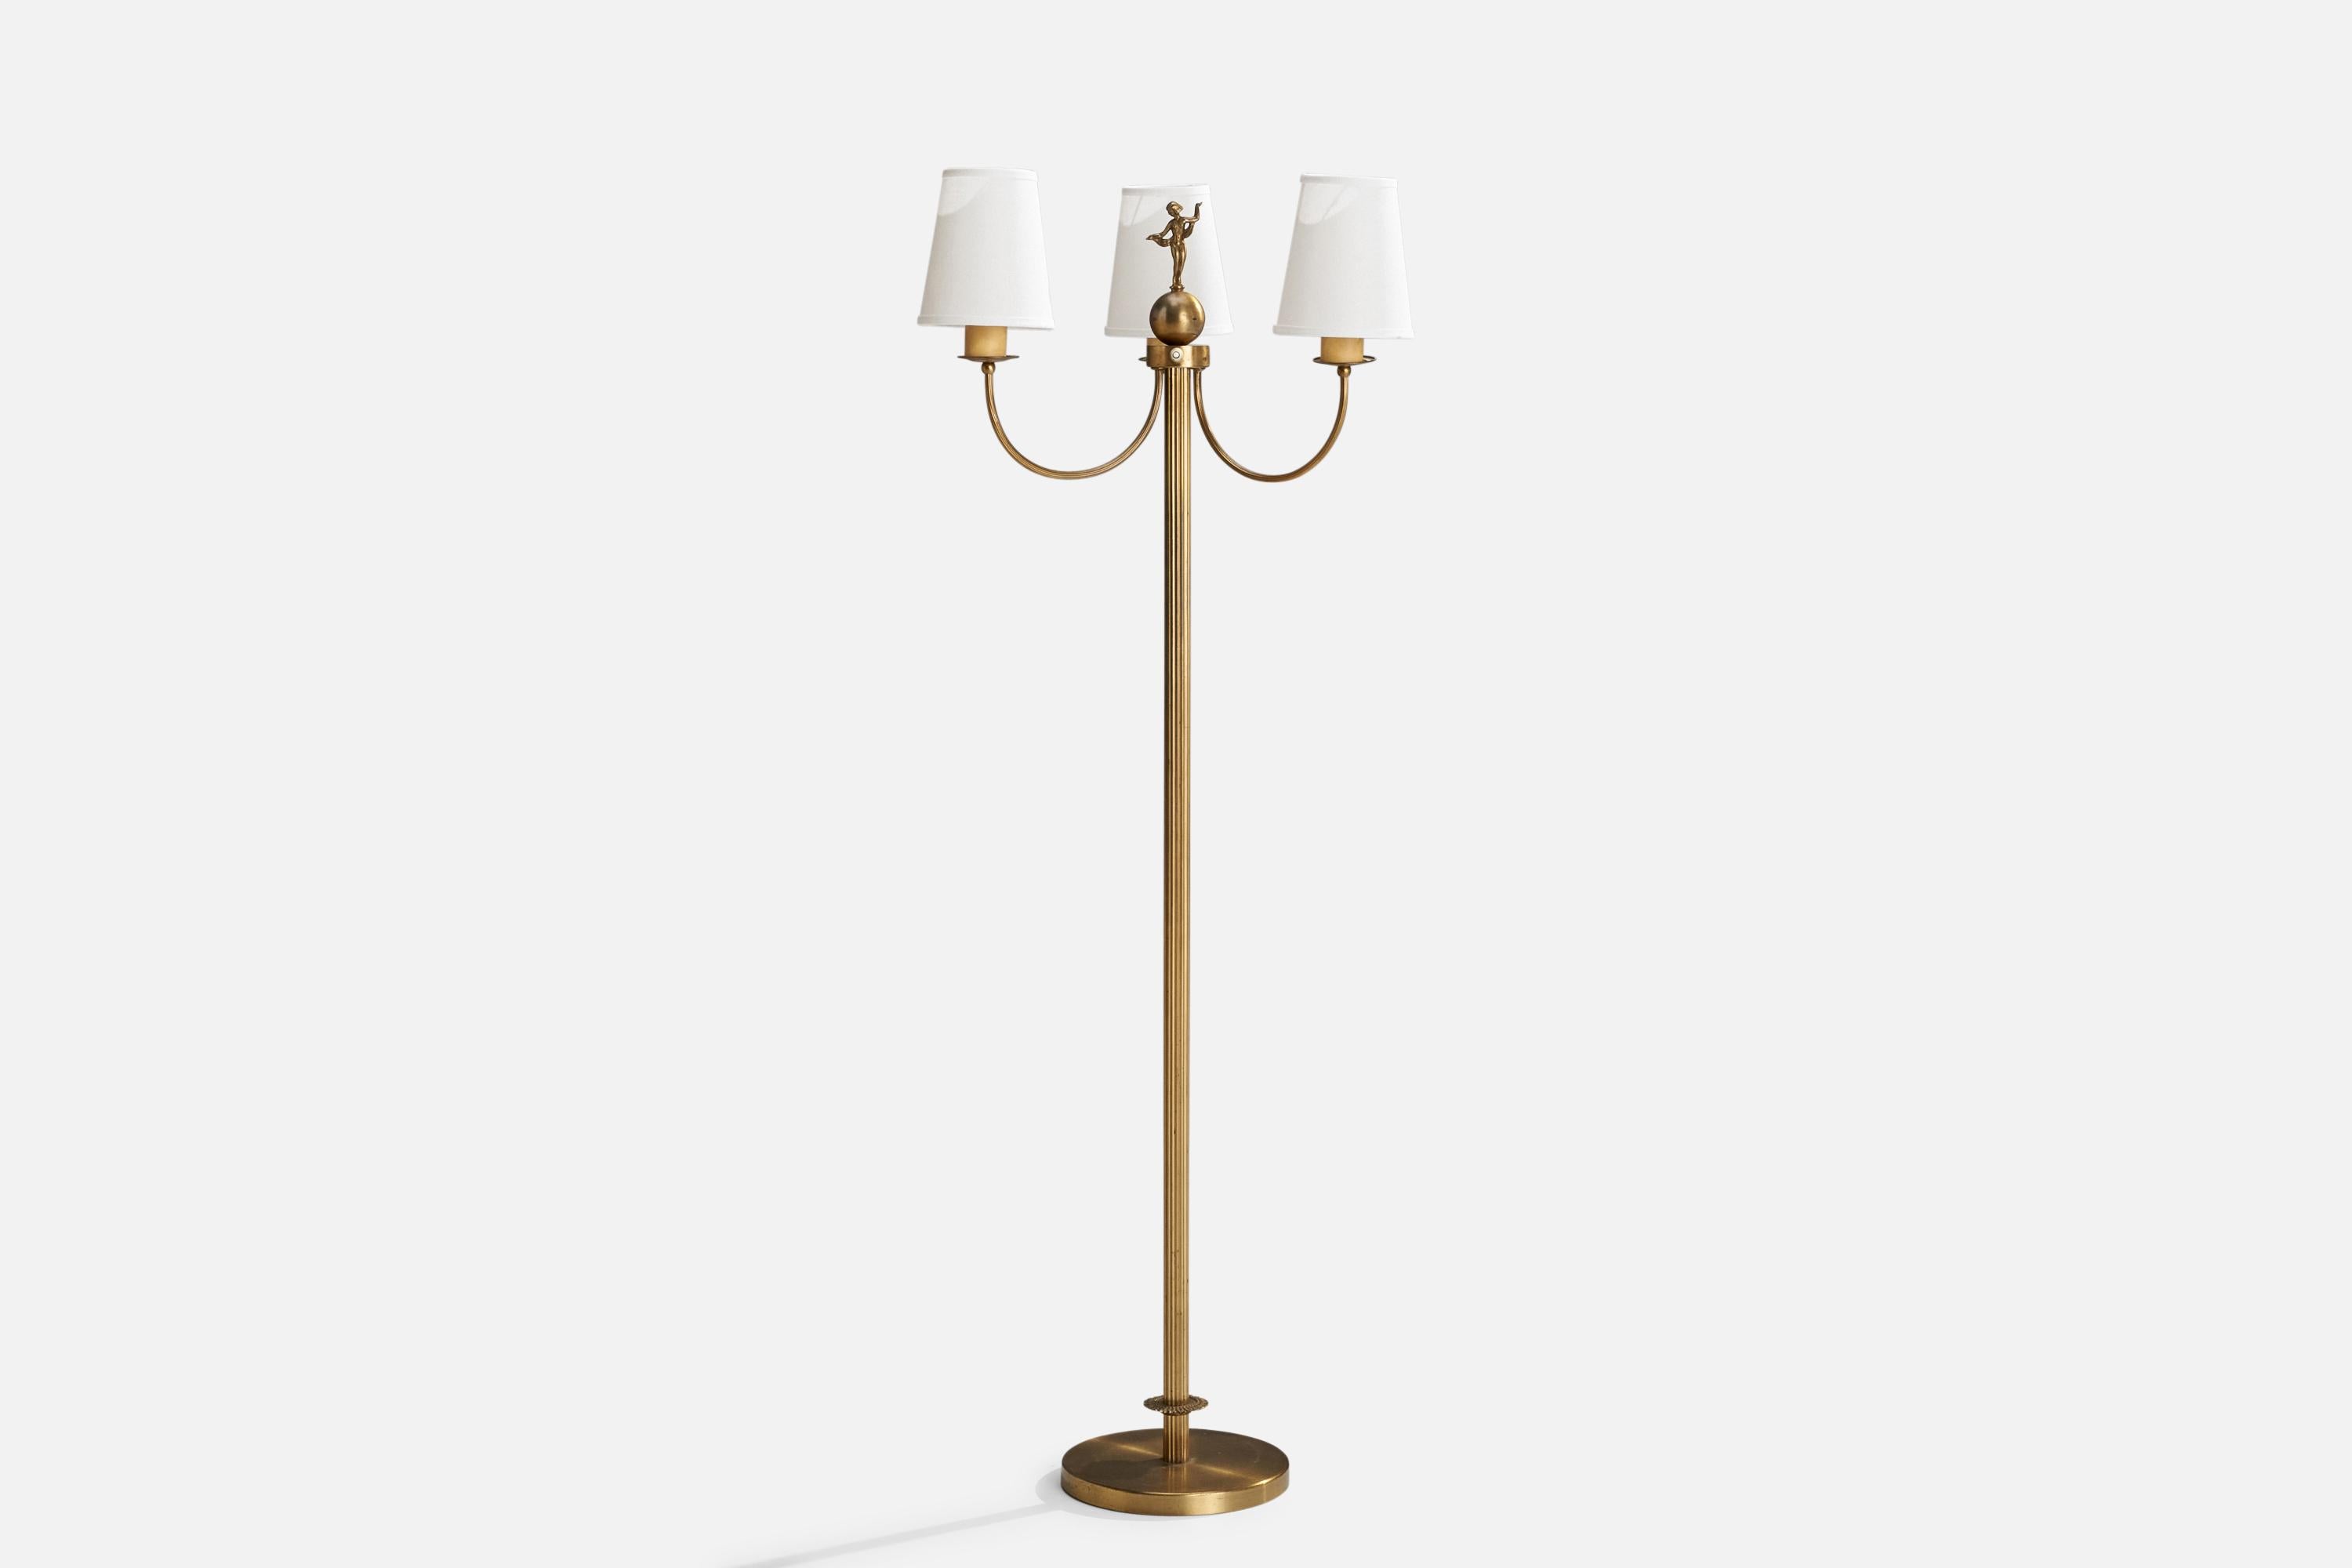 A brass, bakelite and white fabric floor lamp designed and produced in Sweden.

Overall Dimensions (inches): 60.5” H x 20.5” W x 17” D
Stated dimensions include shade.
Bulb Specifications: E-26 Bulb
Number of Sockets: 3
All lighting will be